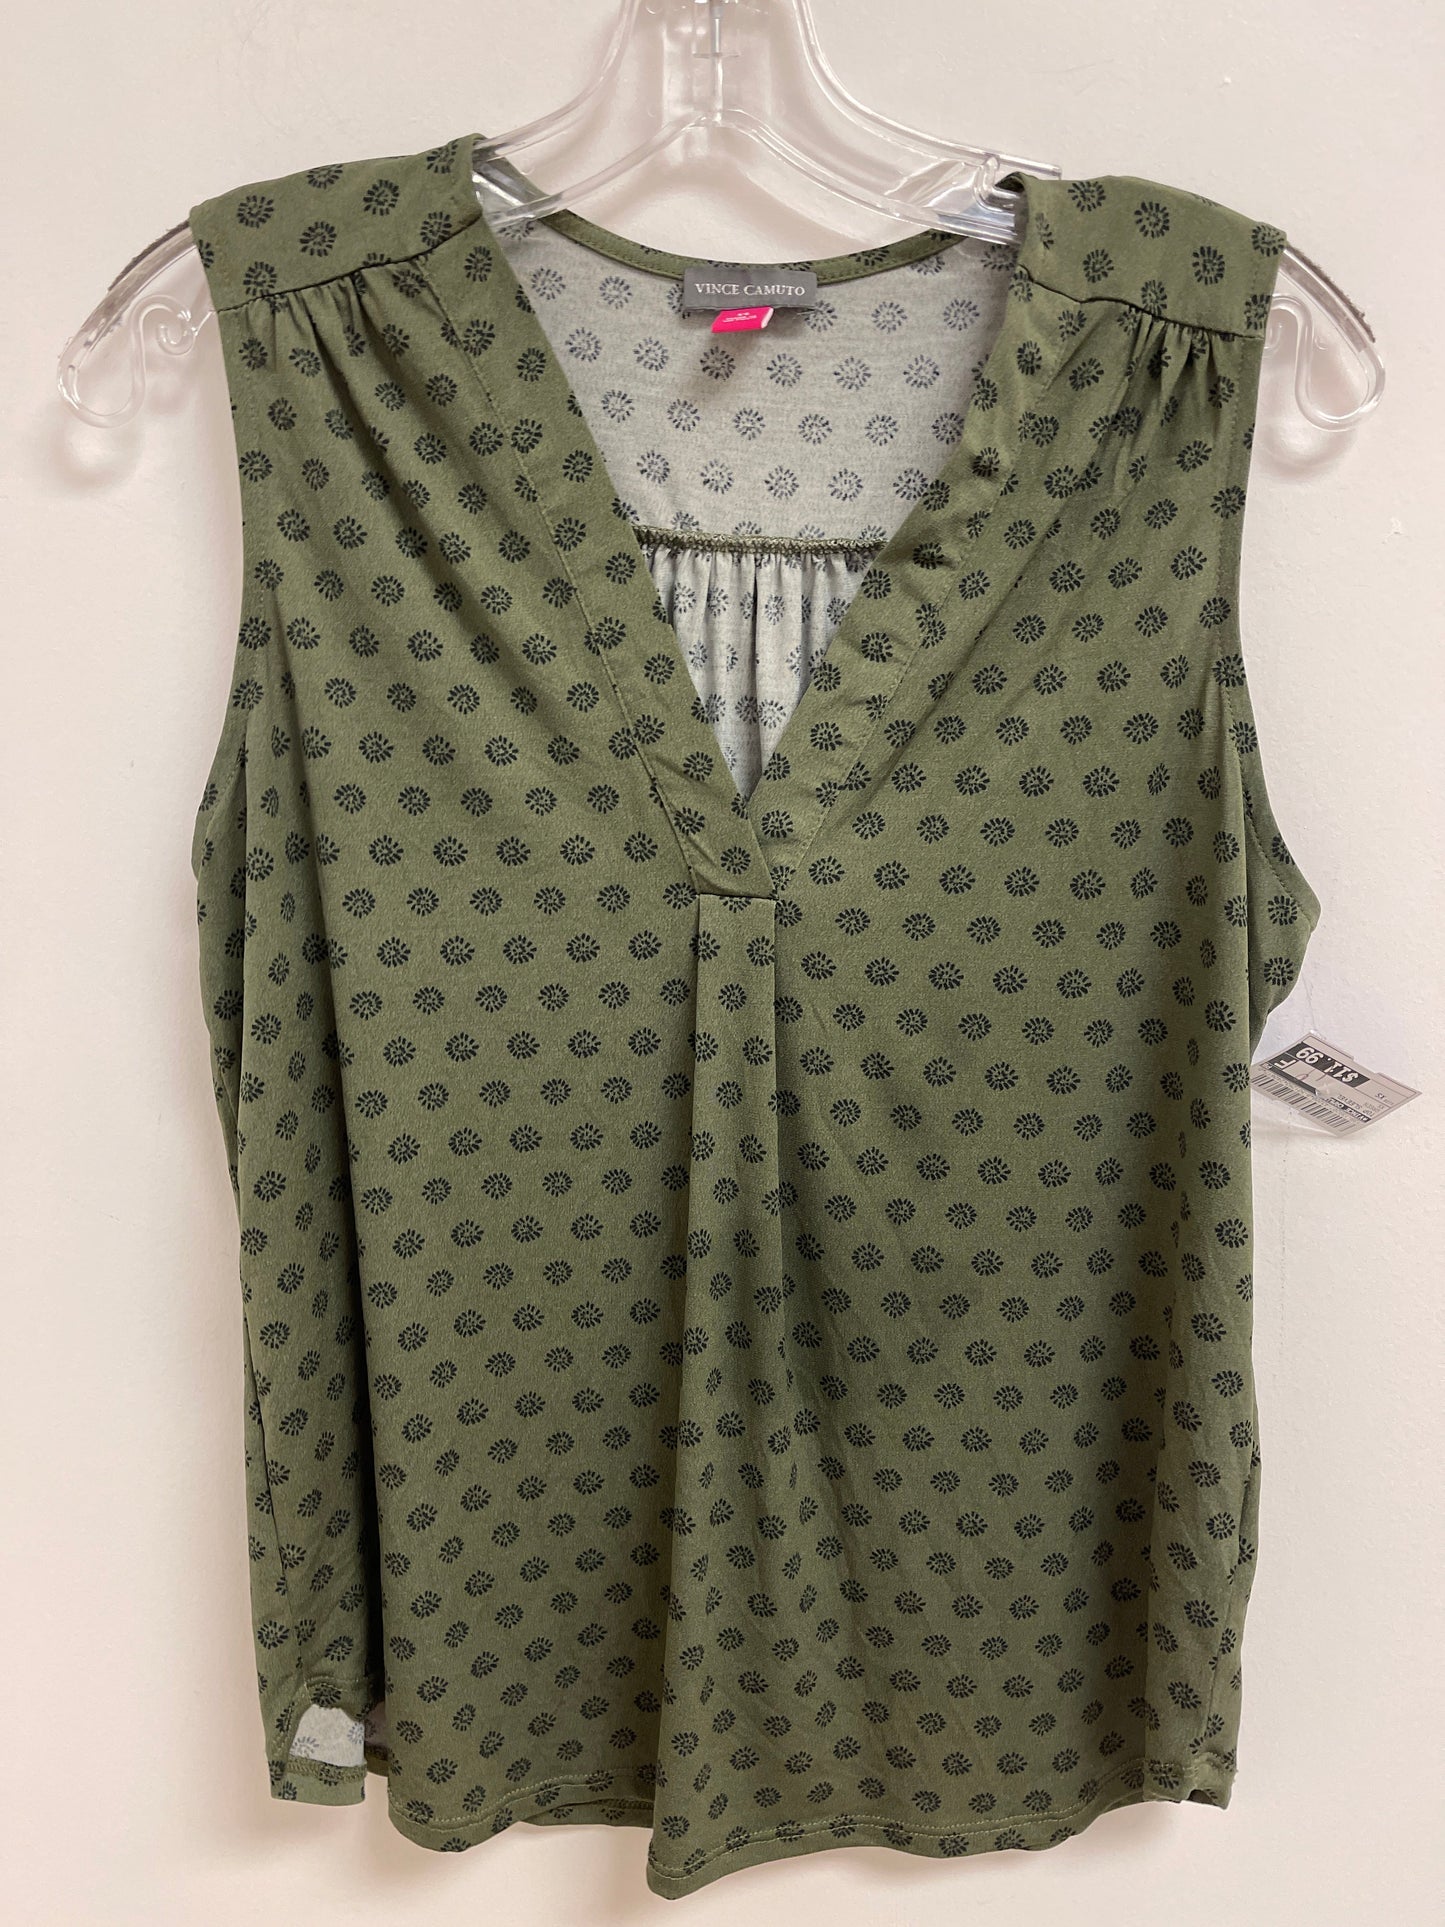 Green Top Sleeveless Vince Camuto, Size Xs